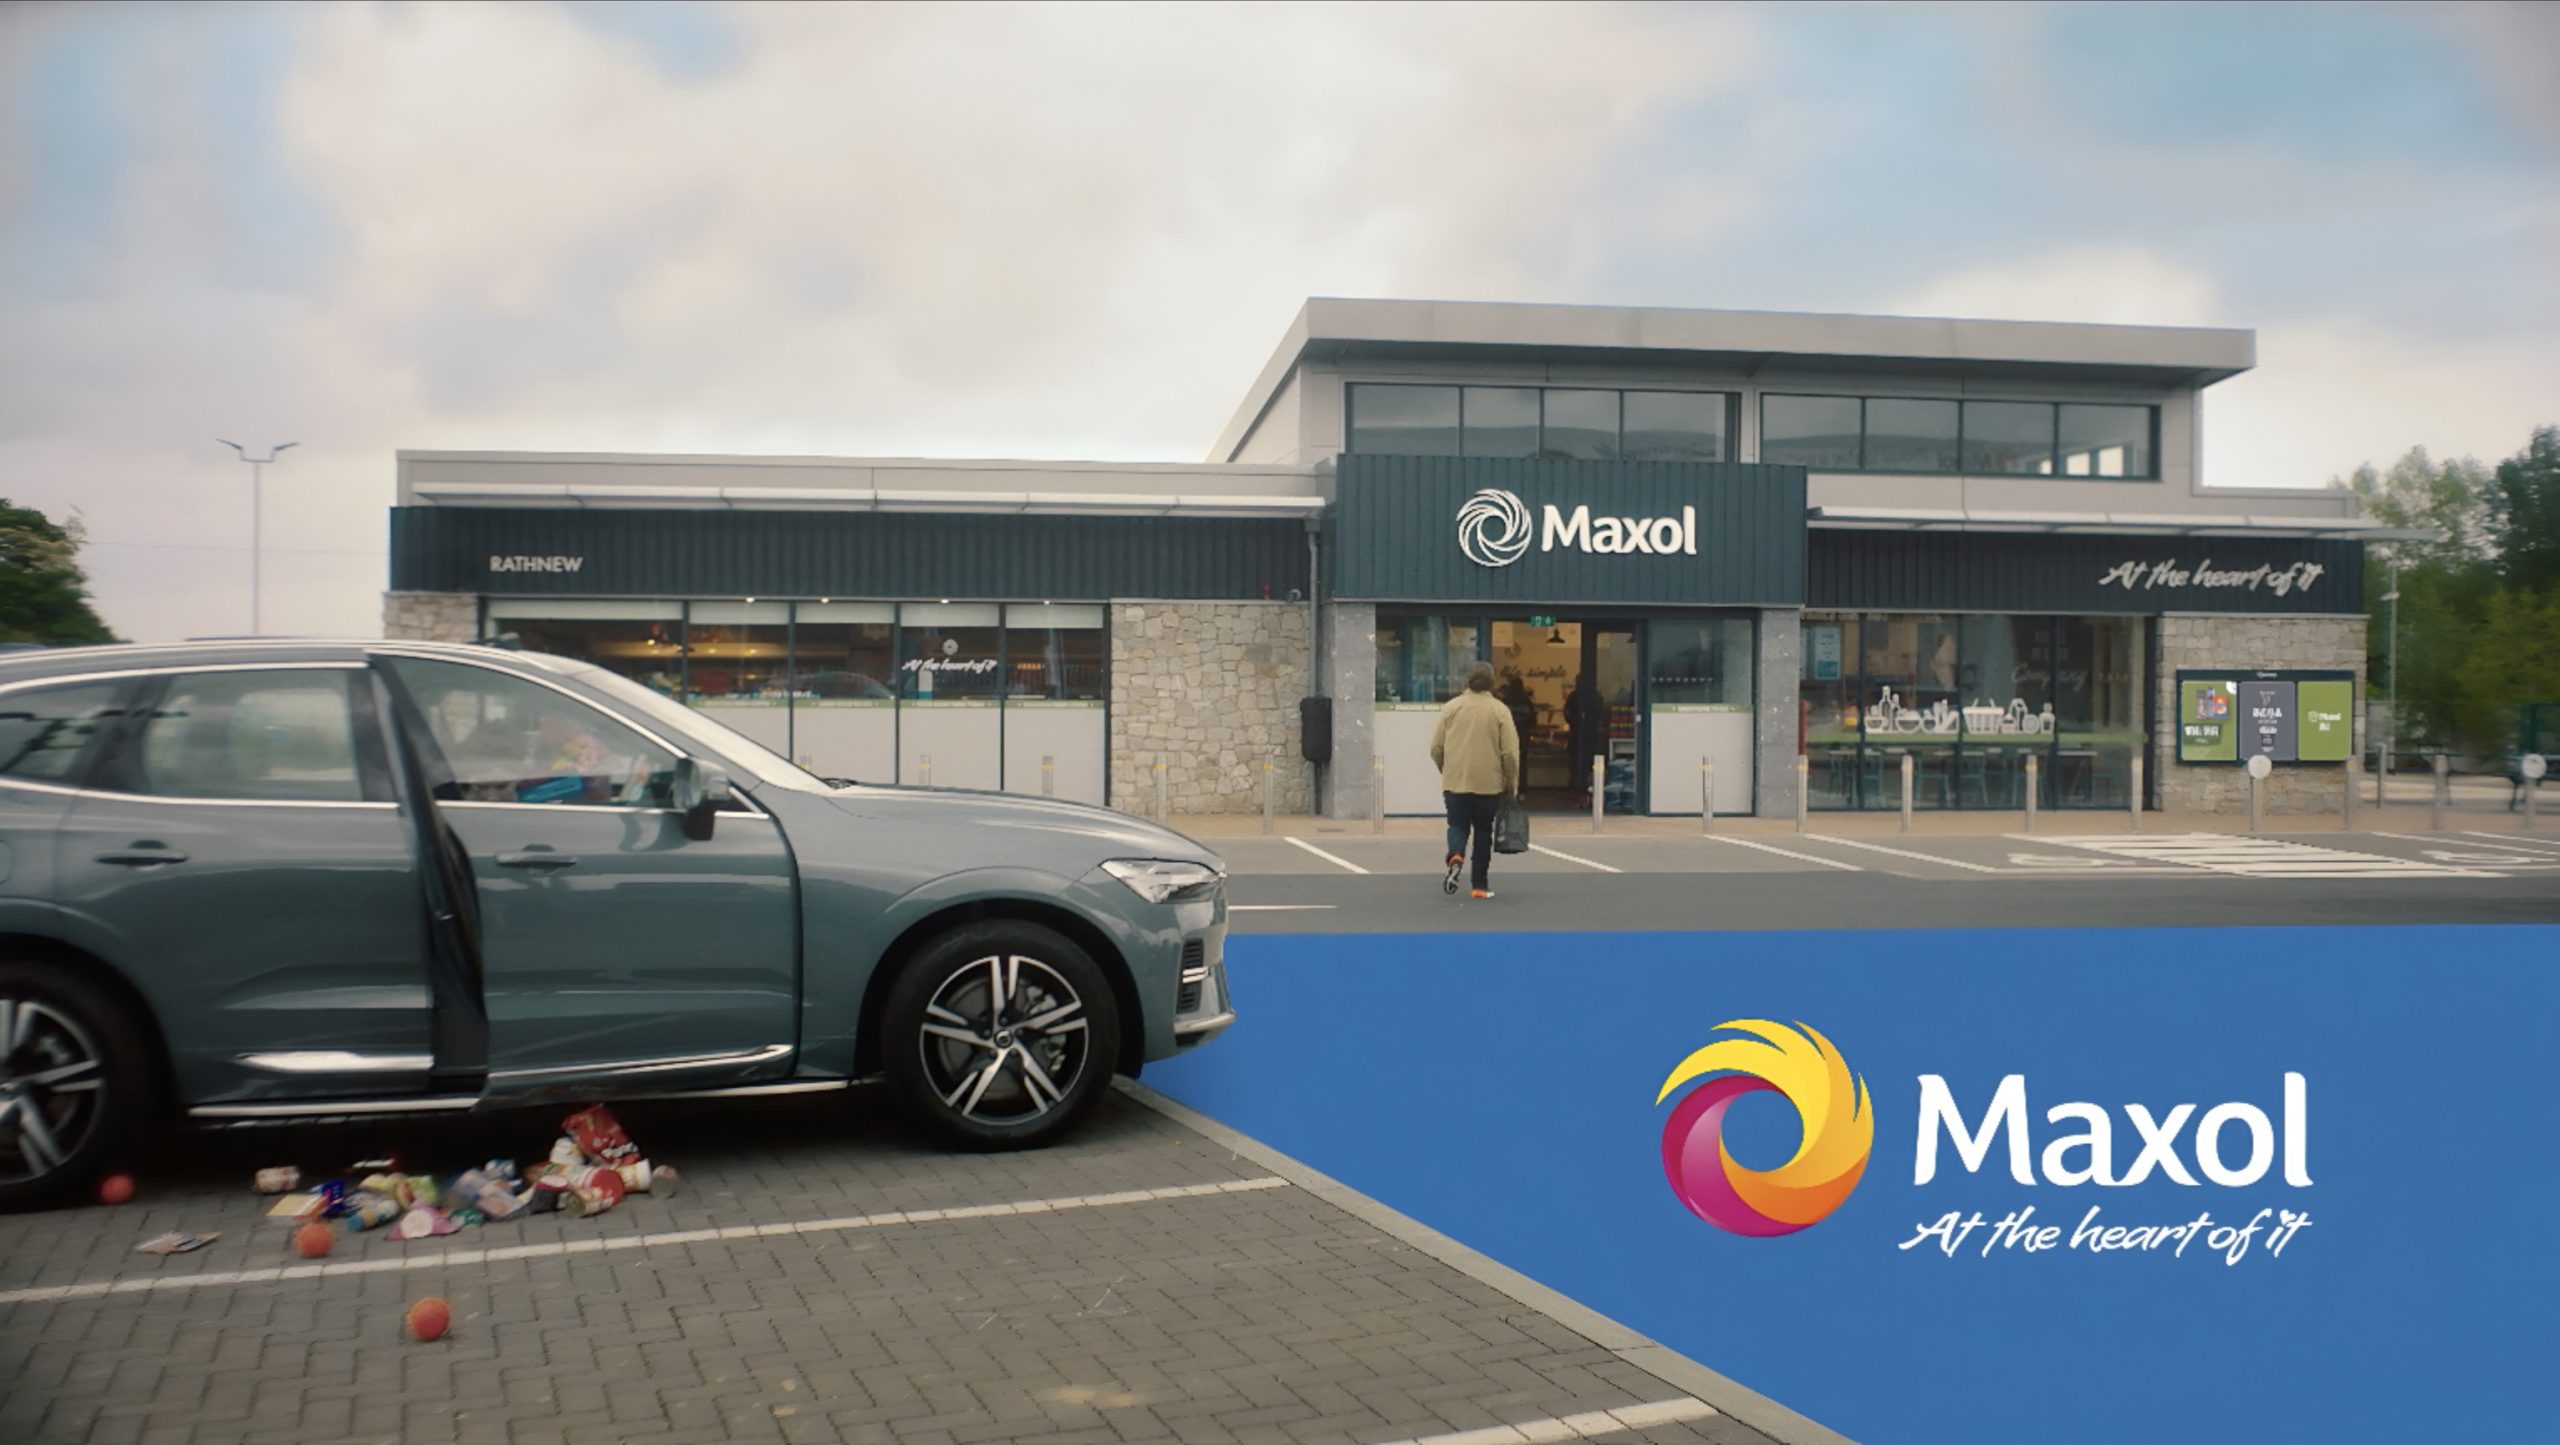 Maxol returns to TV for first time in seven years with new multi-platform campaign